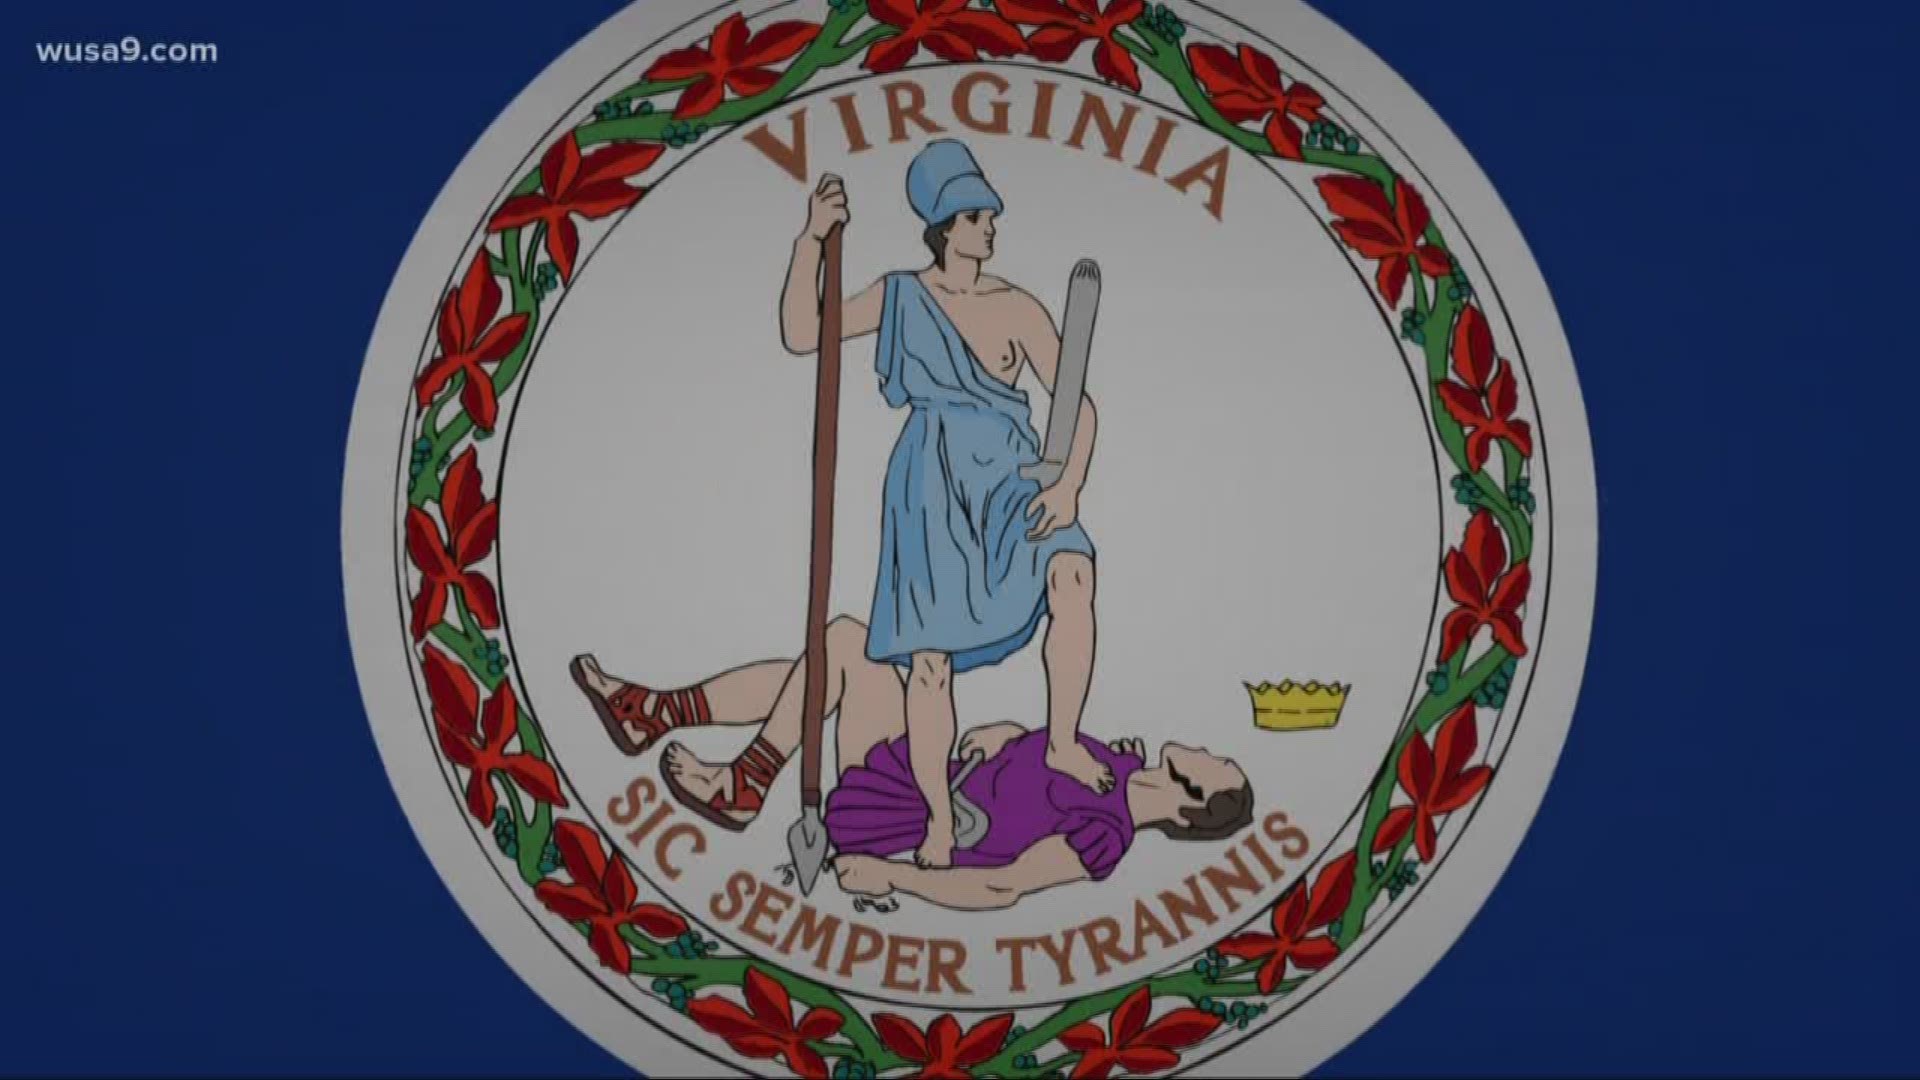 Virginia lawmakers haven't moved to investigate those claims. However, they did manage to kill the Equal Rights Amendment today.